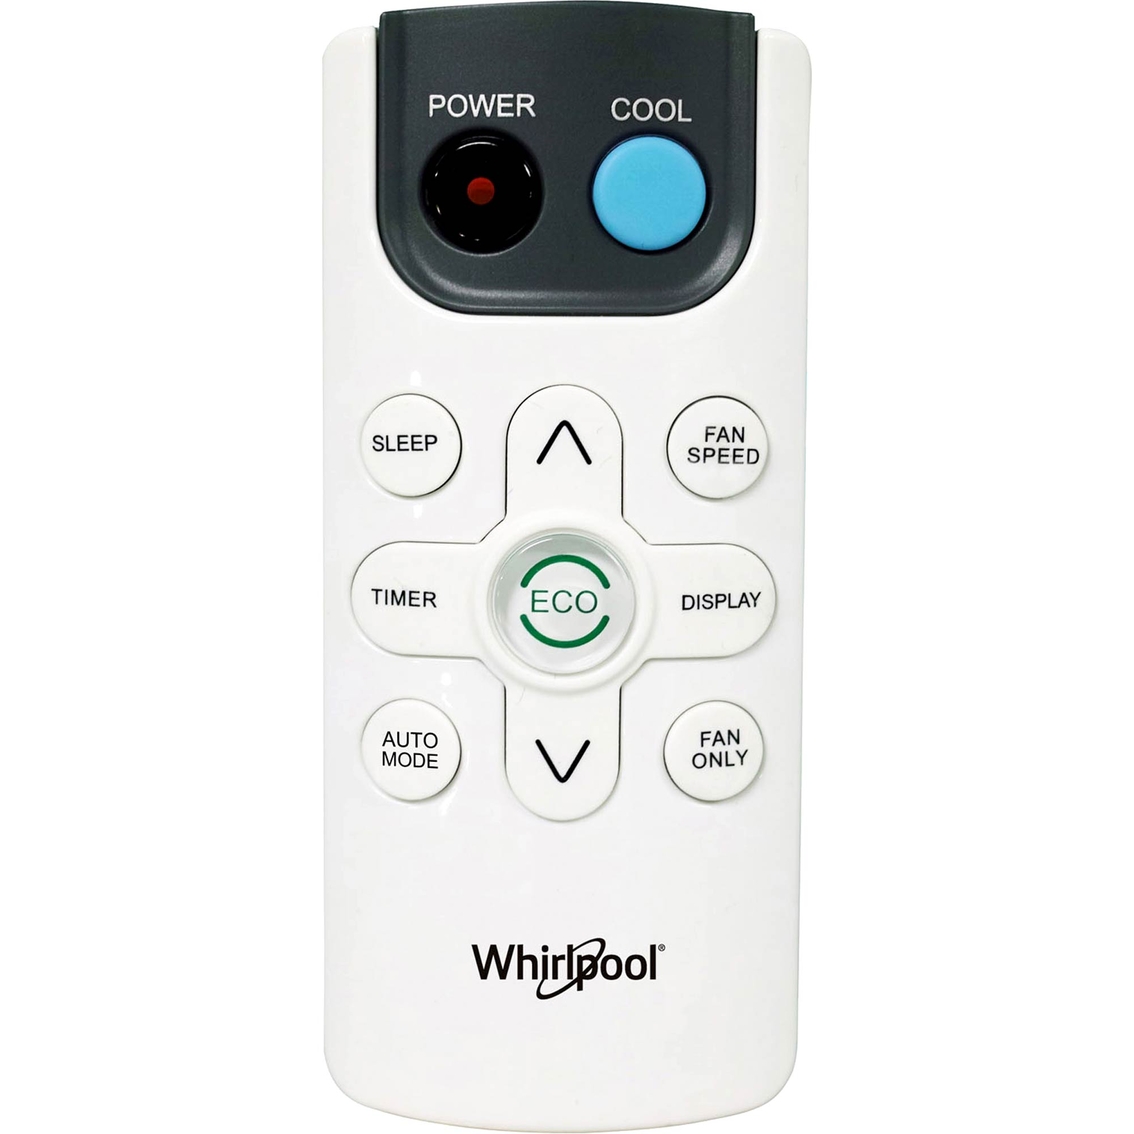 Whirlpool Energy Star 6,000 BTU Window Mounted Air Conditioner with Remote Control - Image 4 of 5